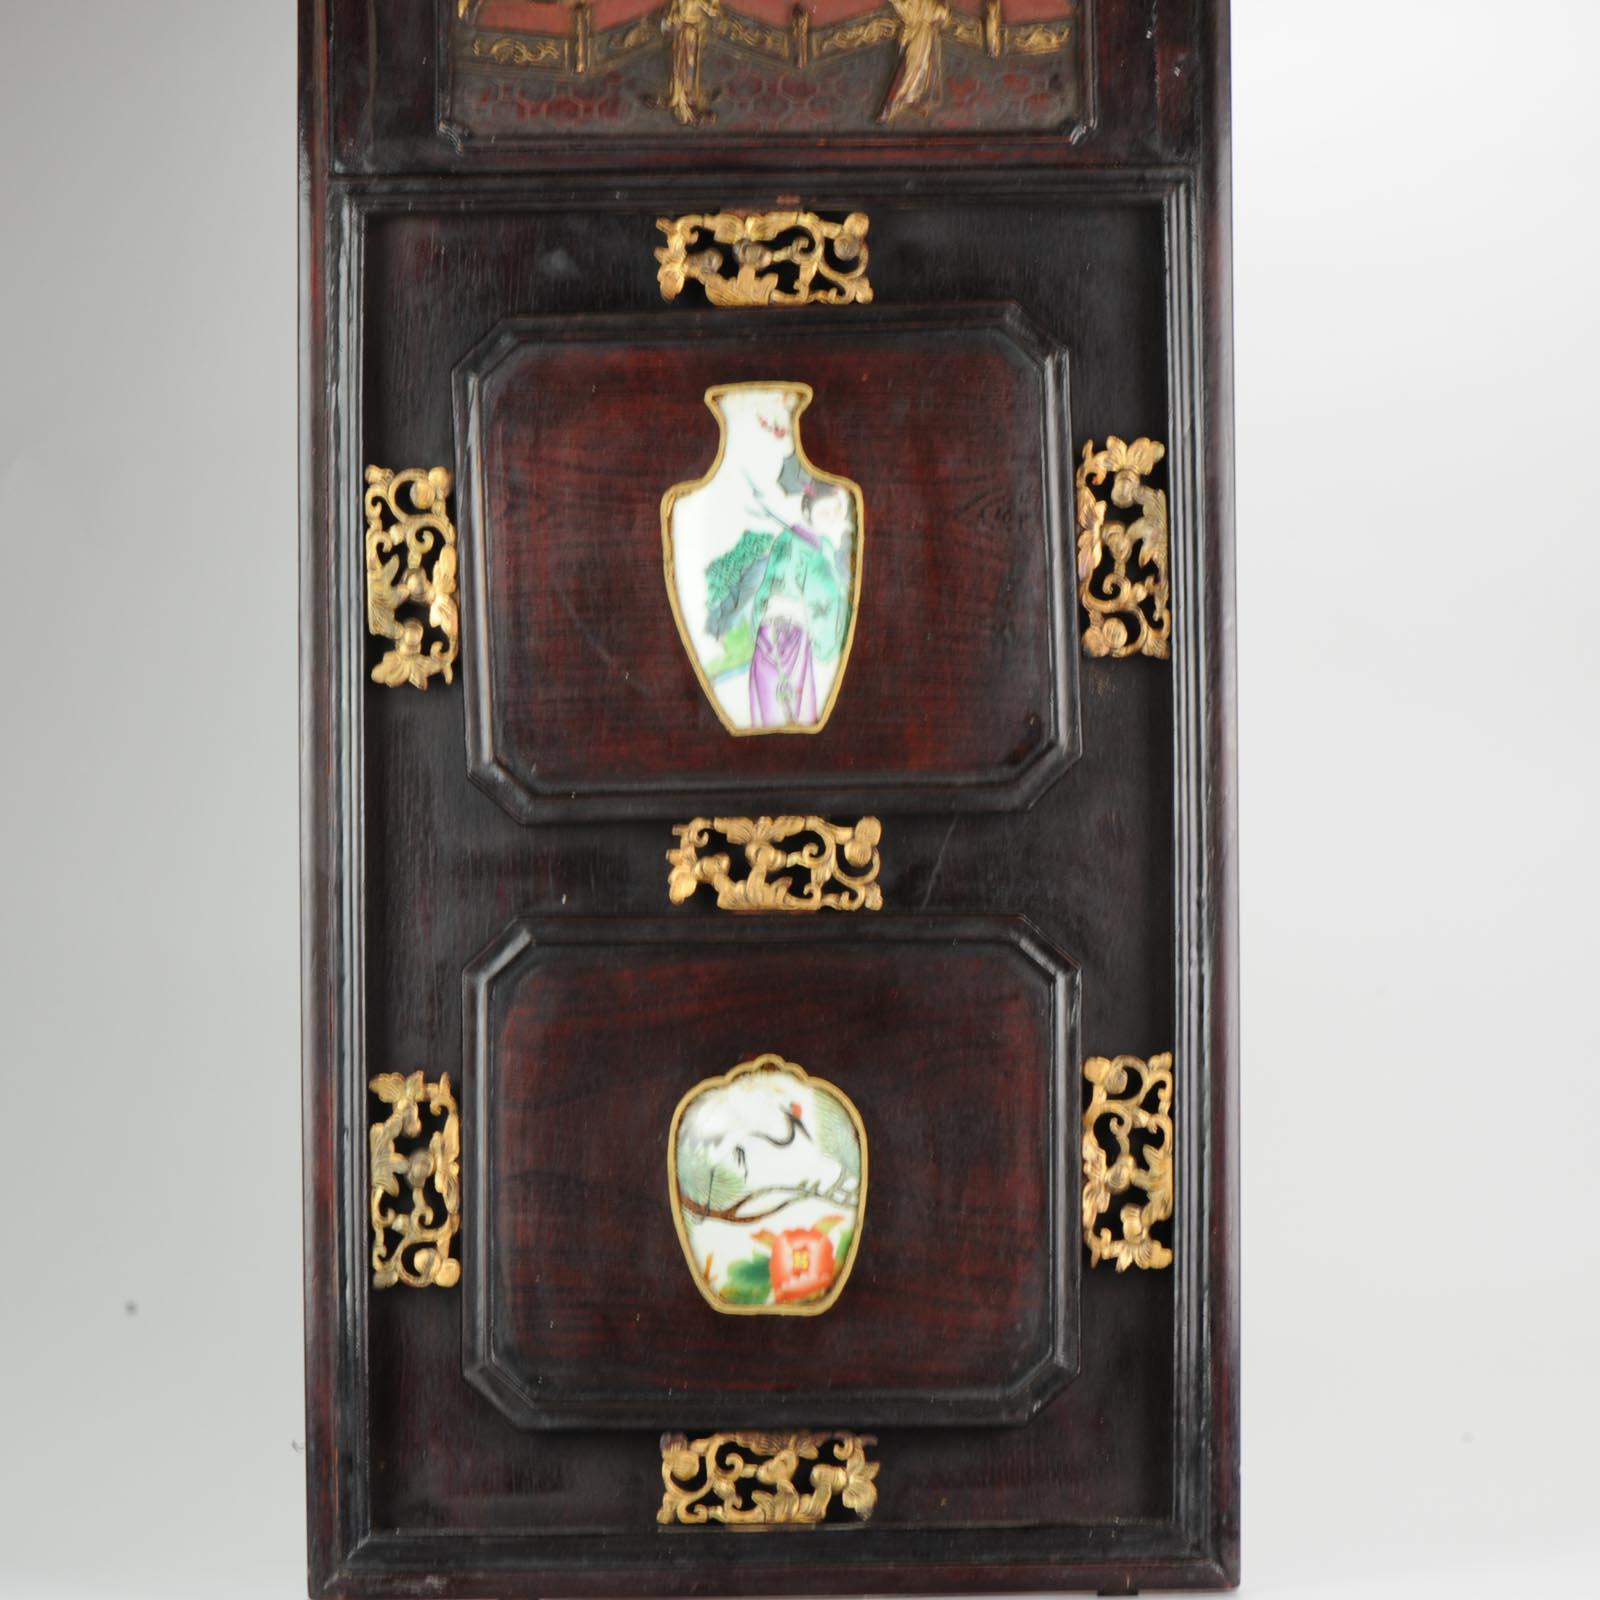 A very nice and unusual example. Large wooden carved frame with 2 porcelain rounded items in it. 1 with a crane and 1 with a woman. The porcelain pieces are round. Made of shards of porcelain broken during the cultural